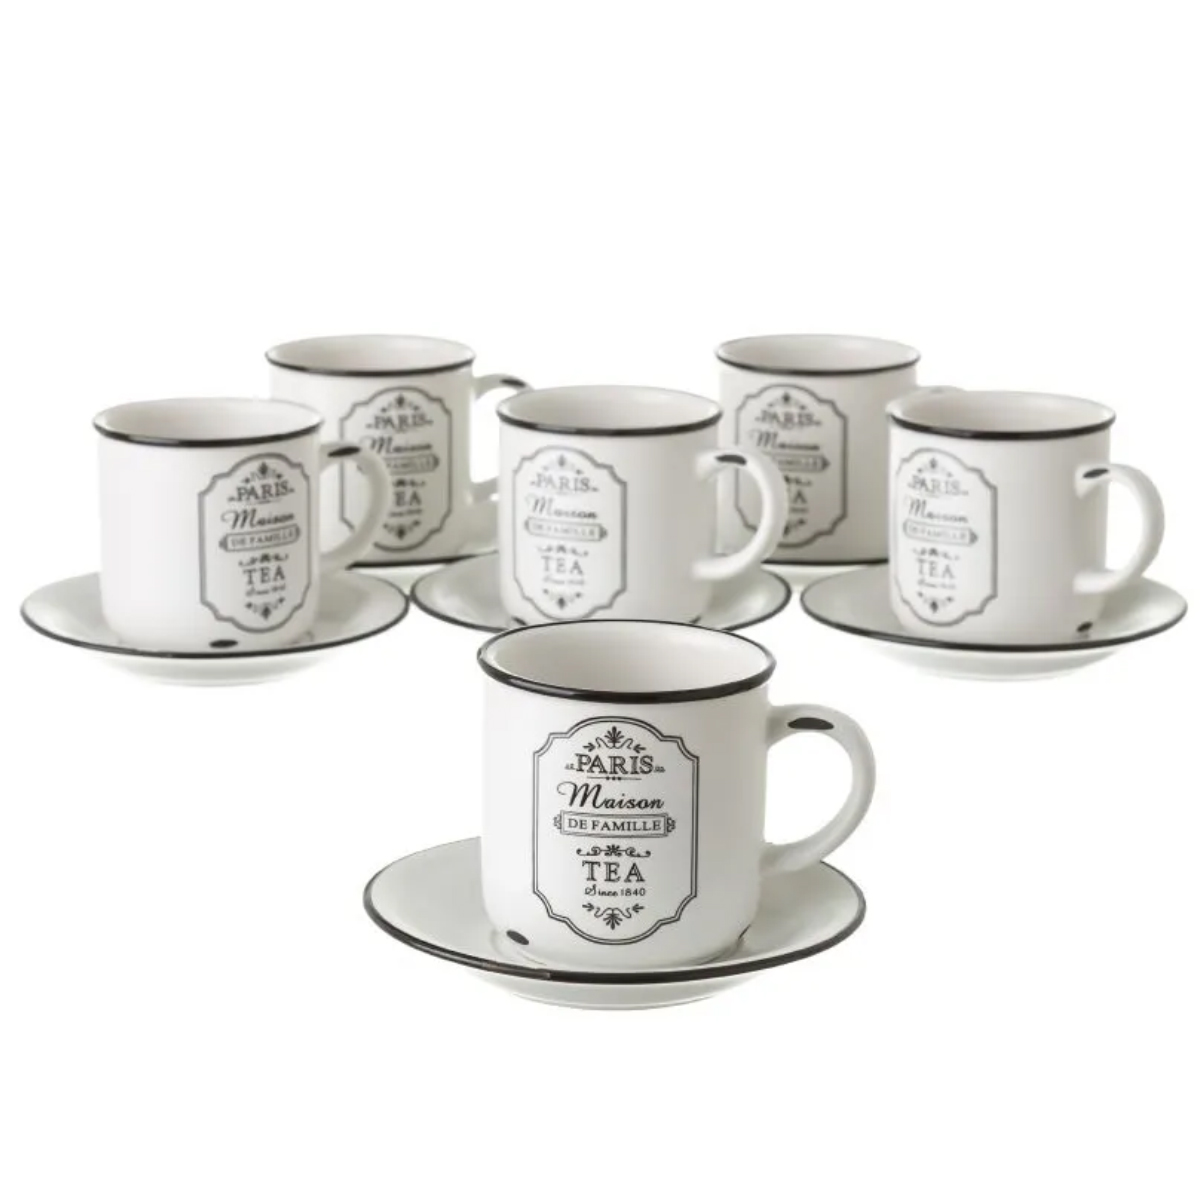 Set of 6 coffee cups with ceramic saucers